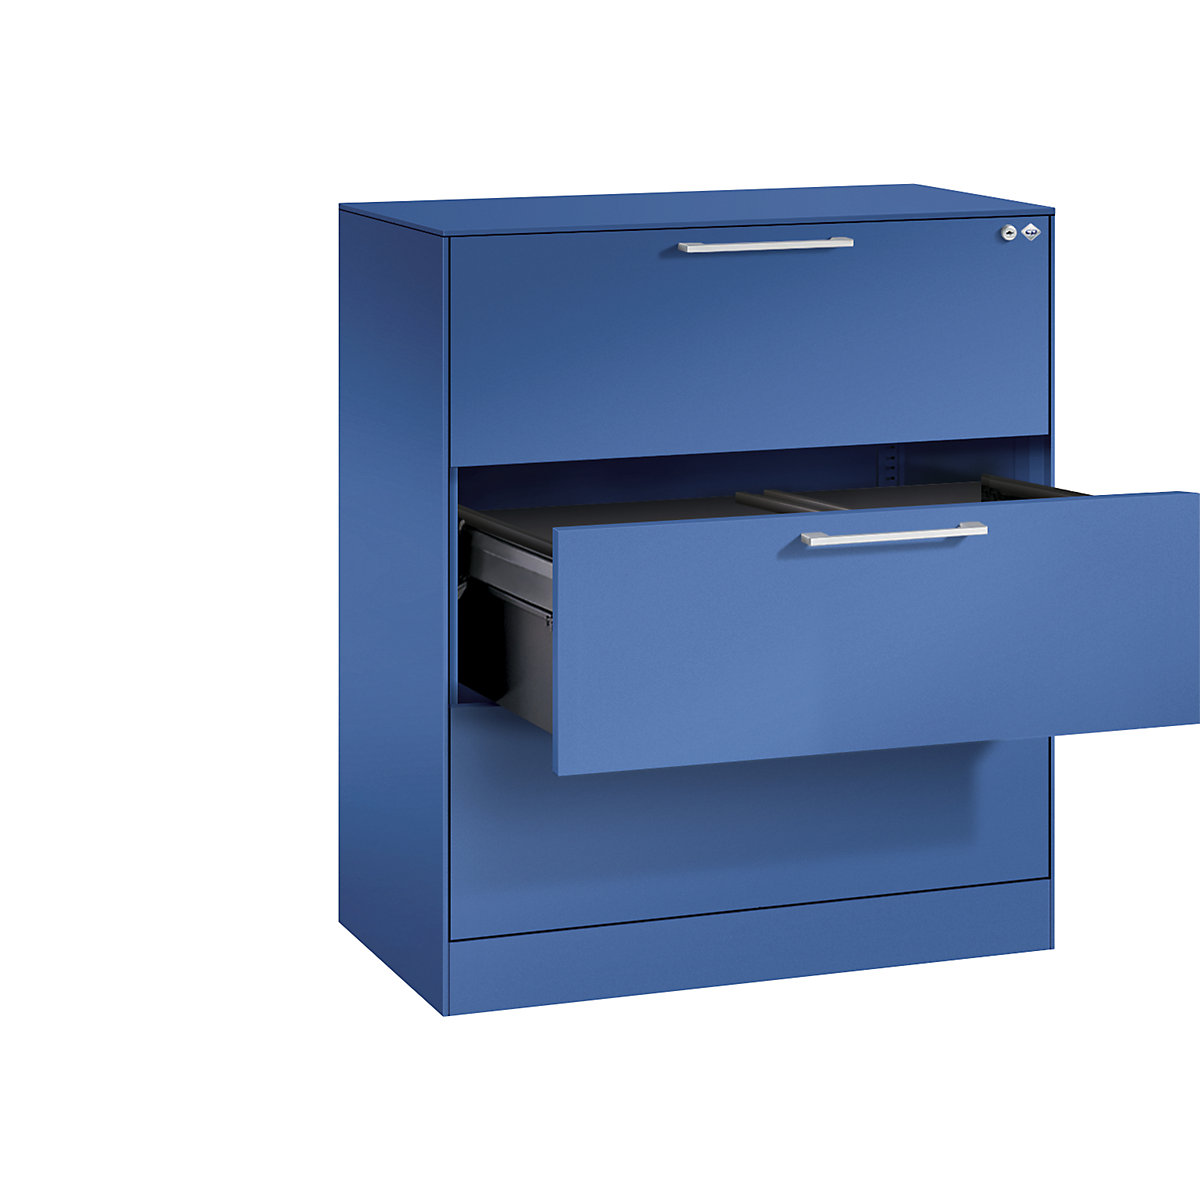 ASISTO suspension filing cabinet – C+P, width 800 mm, with 3 drawers, gentian blue/gentian blue-5